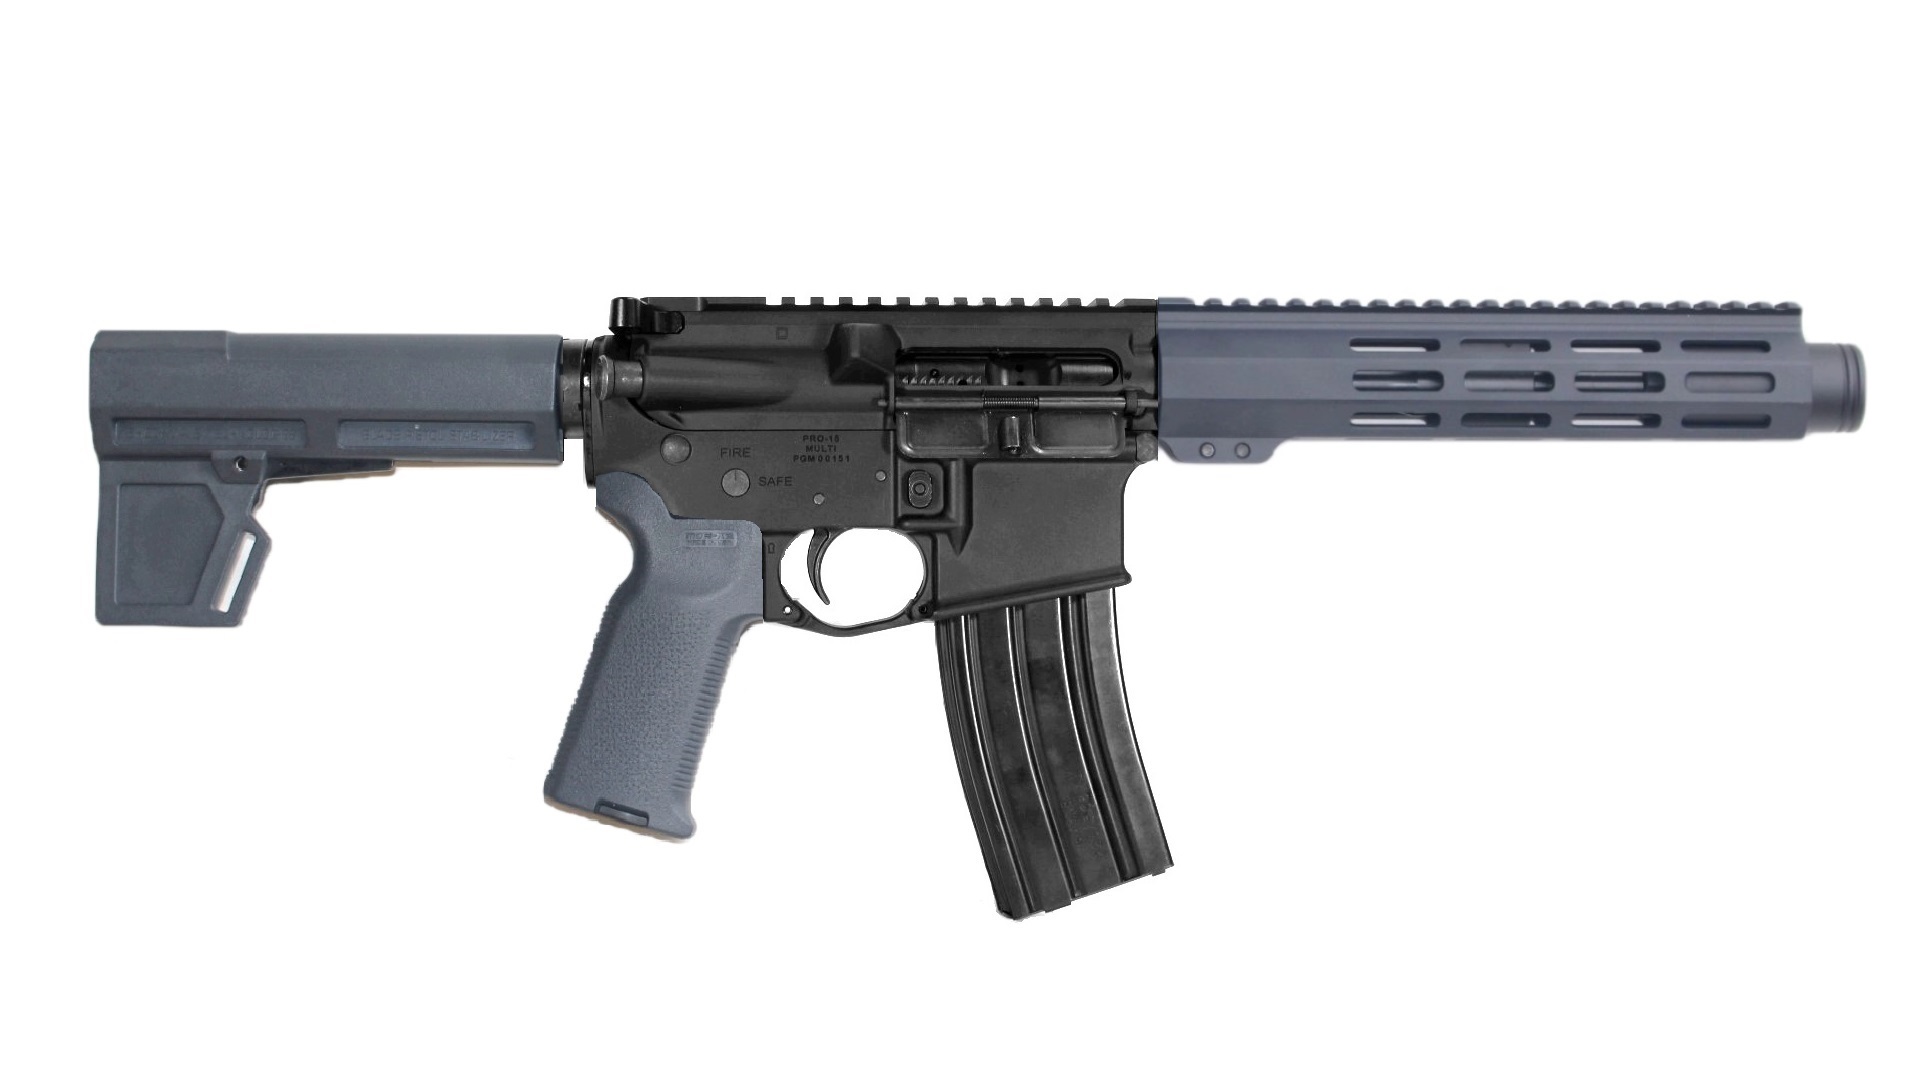 P2A PATRIOT 7.5" 300 Blackout 1/7 or 1/5 Pistol Length Melonite M-LOK Pistol with Flash Can - BLK/GRAY